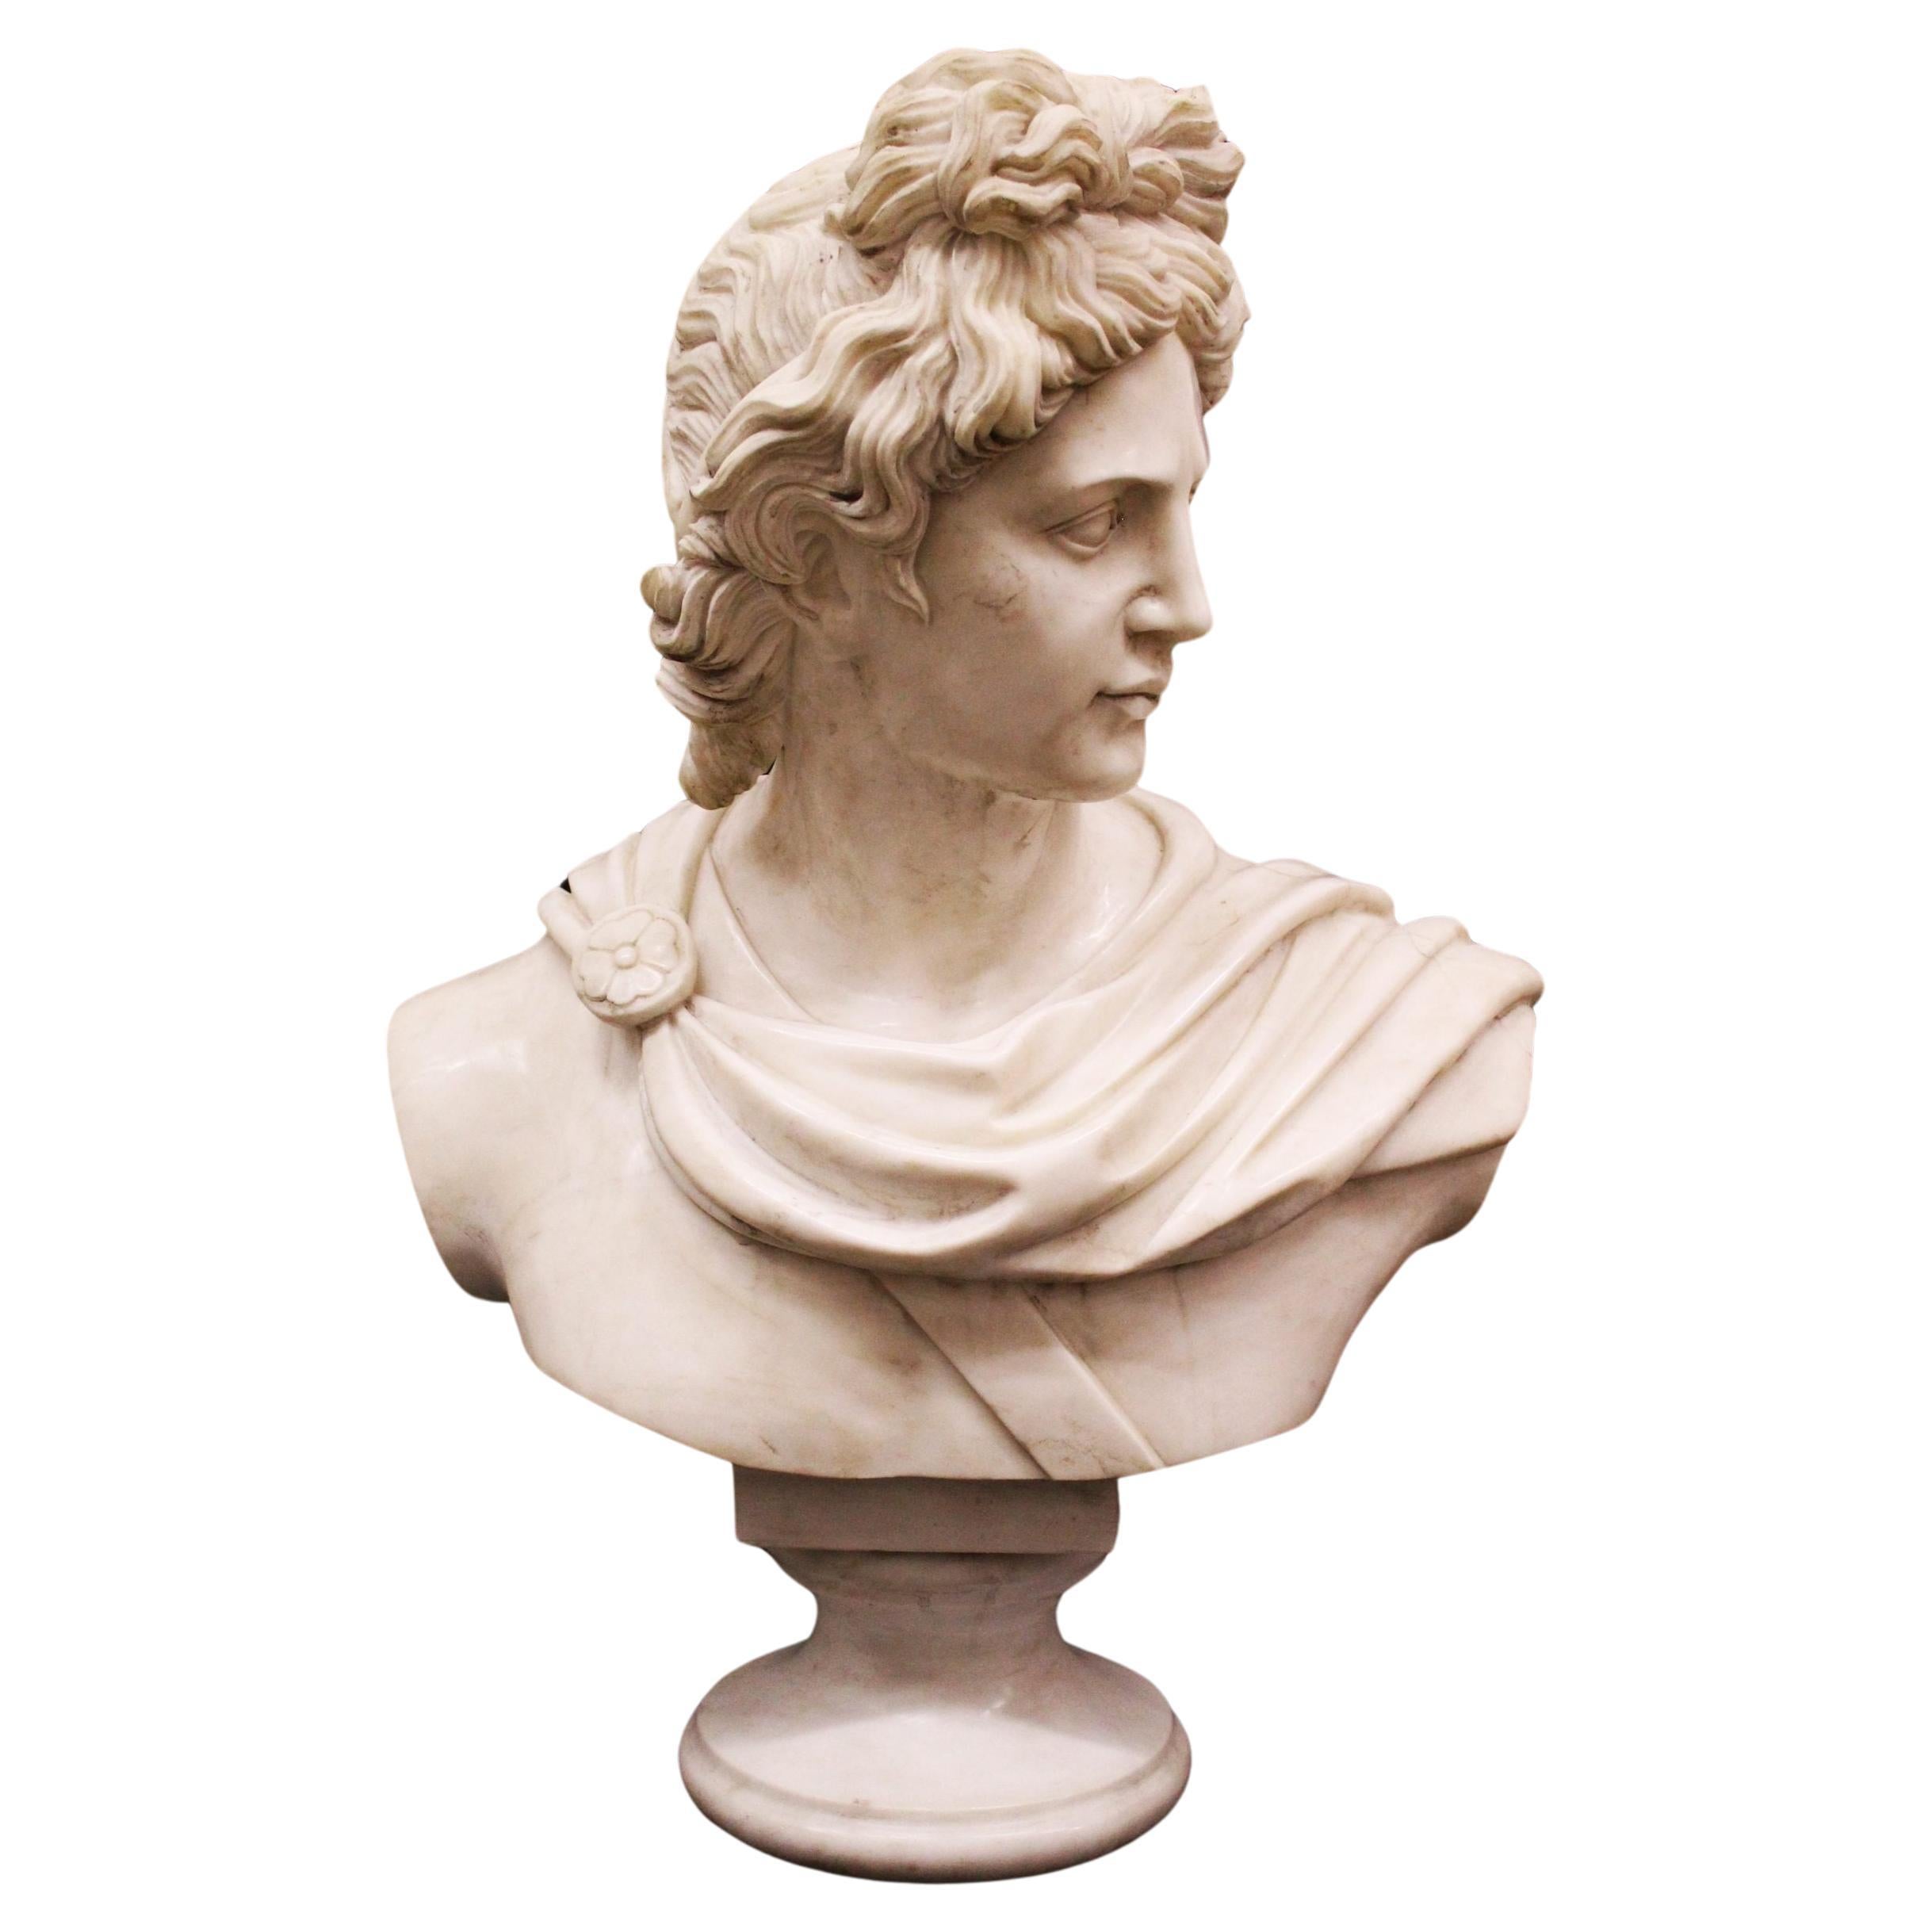 What is an Apollo bust?